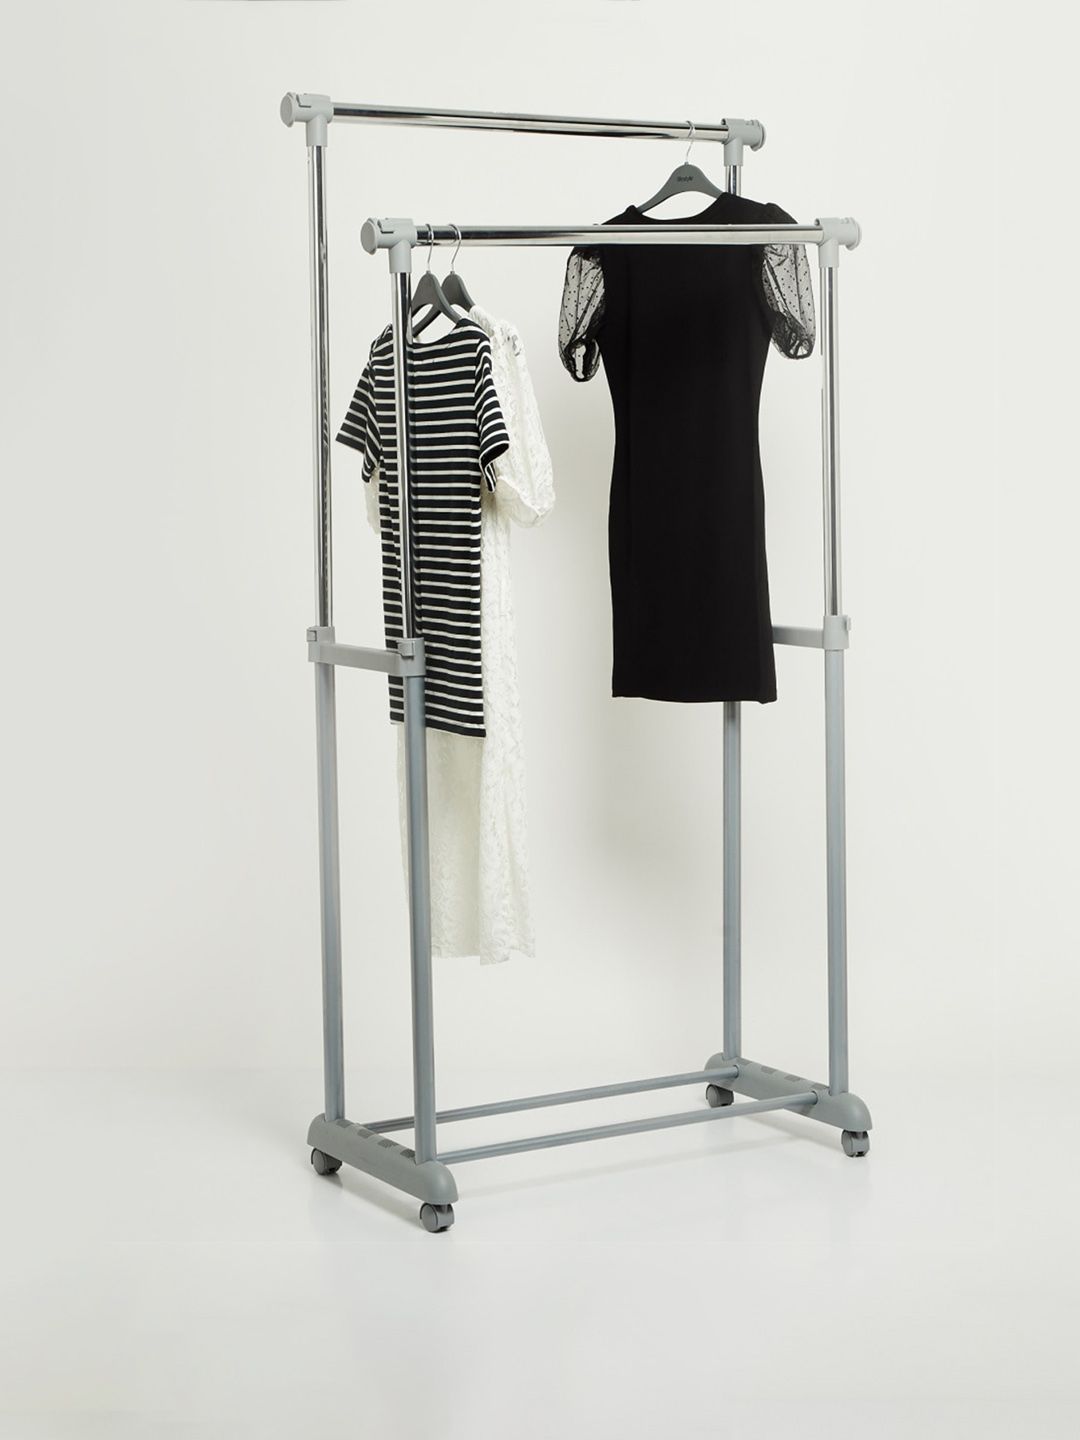 Home Centre Grey Solid Portable Stainless Steel Garment Rack With Middle Pole Hanger Price in India